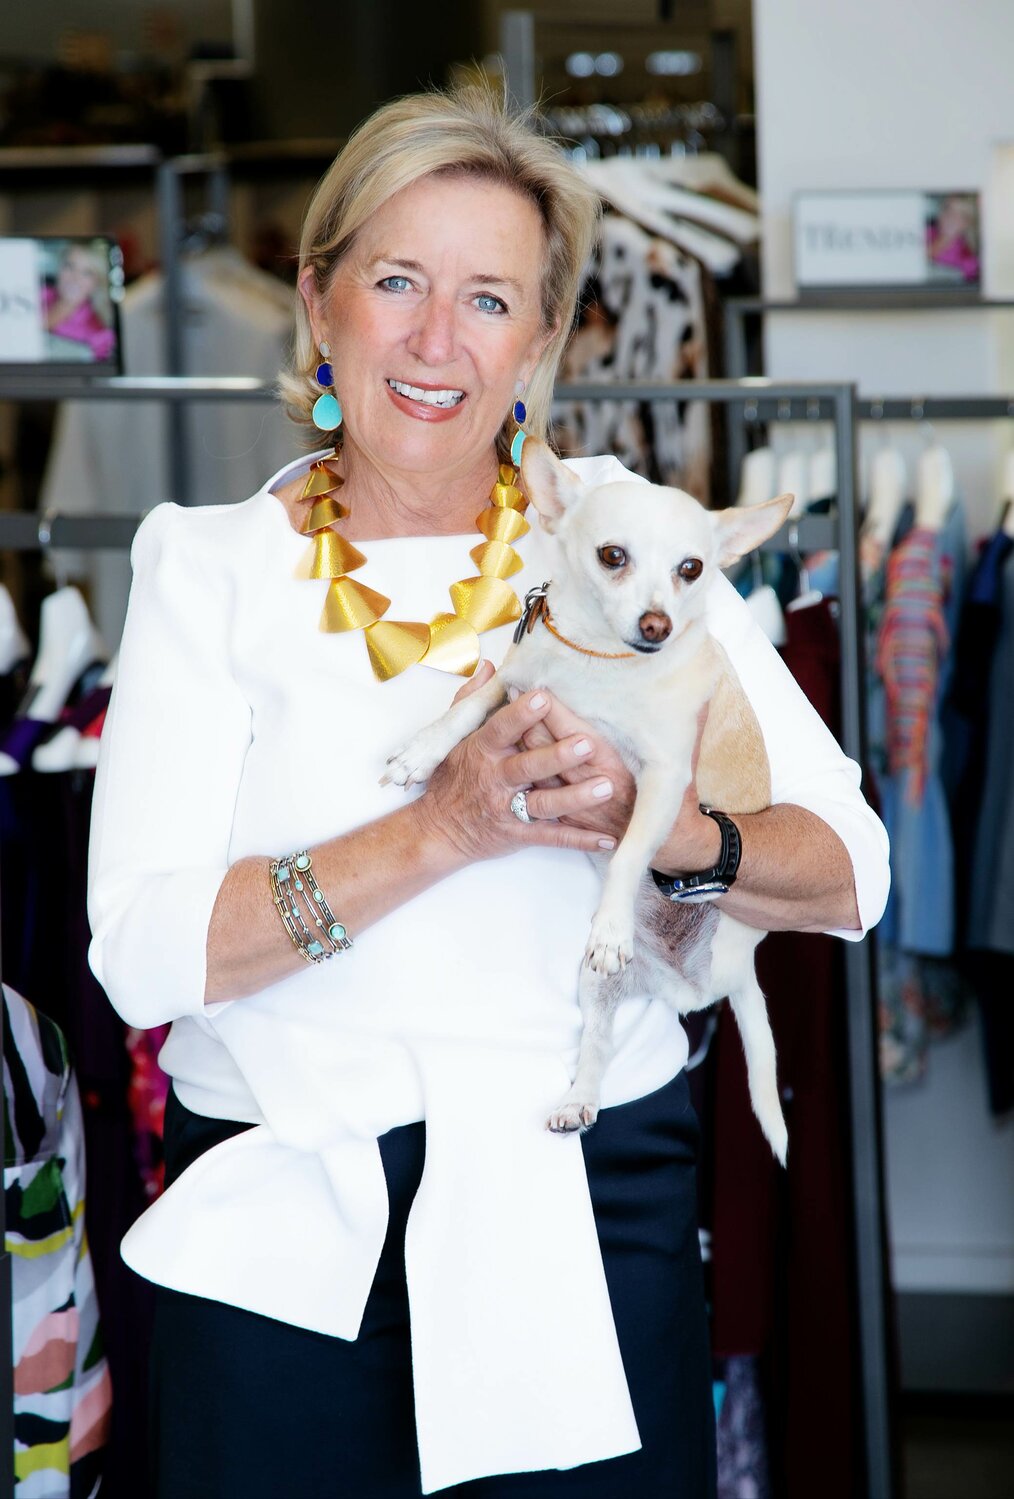 My Sister’s Closet founder Ann Siner donated $100,000 to Arizona Humane Society and $100,000 to Fresh Start Women’s Foundation